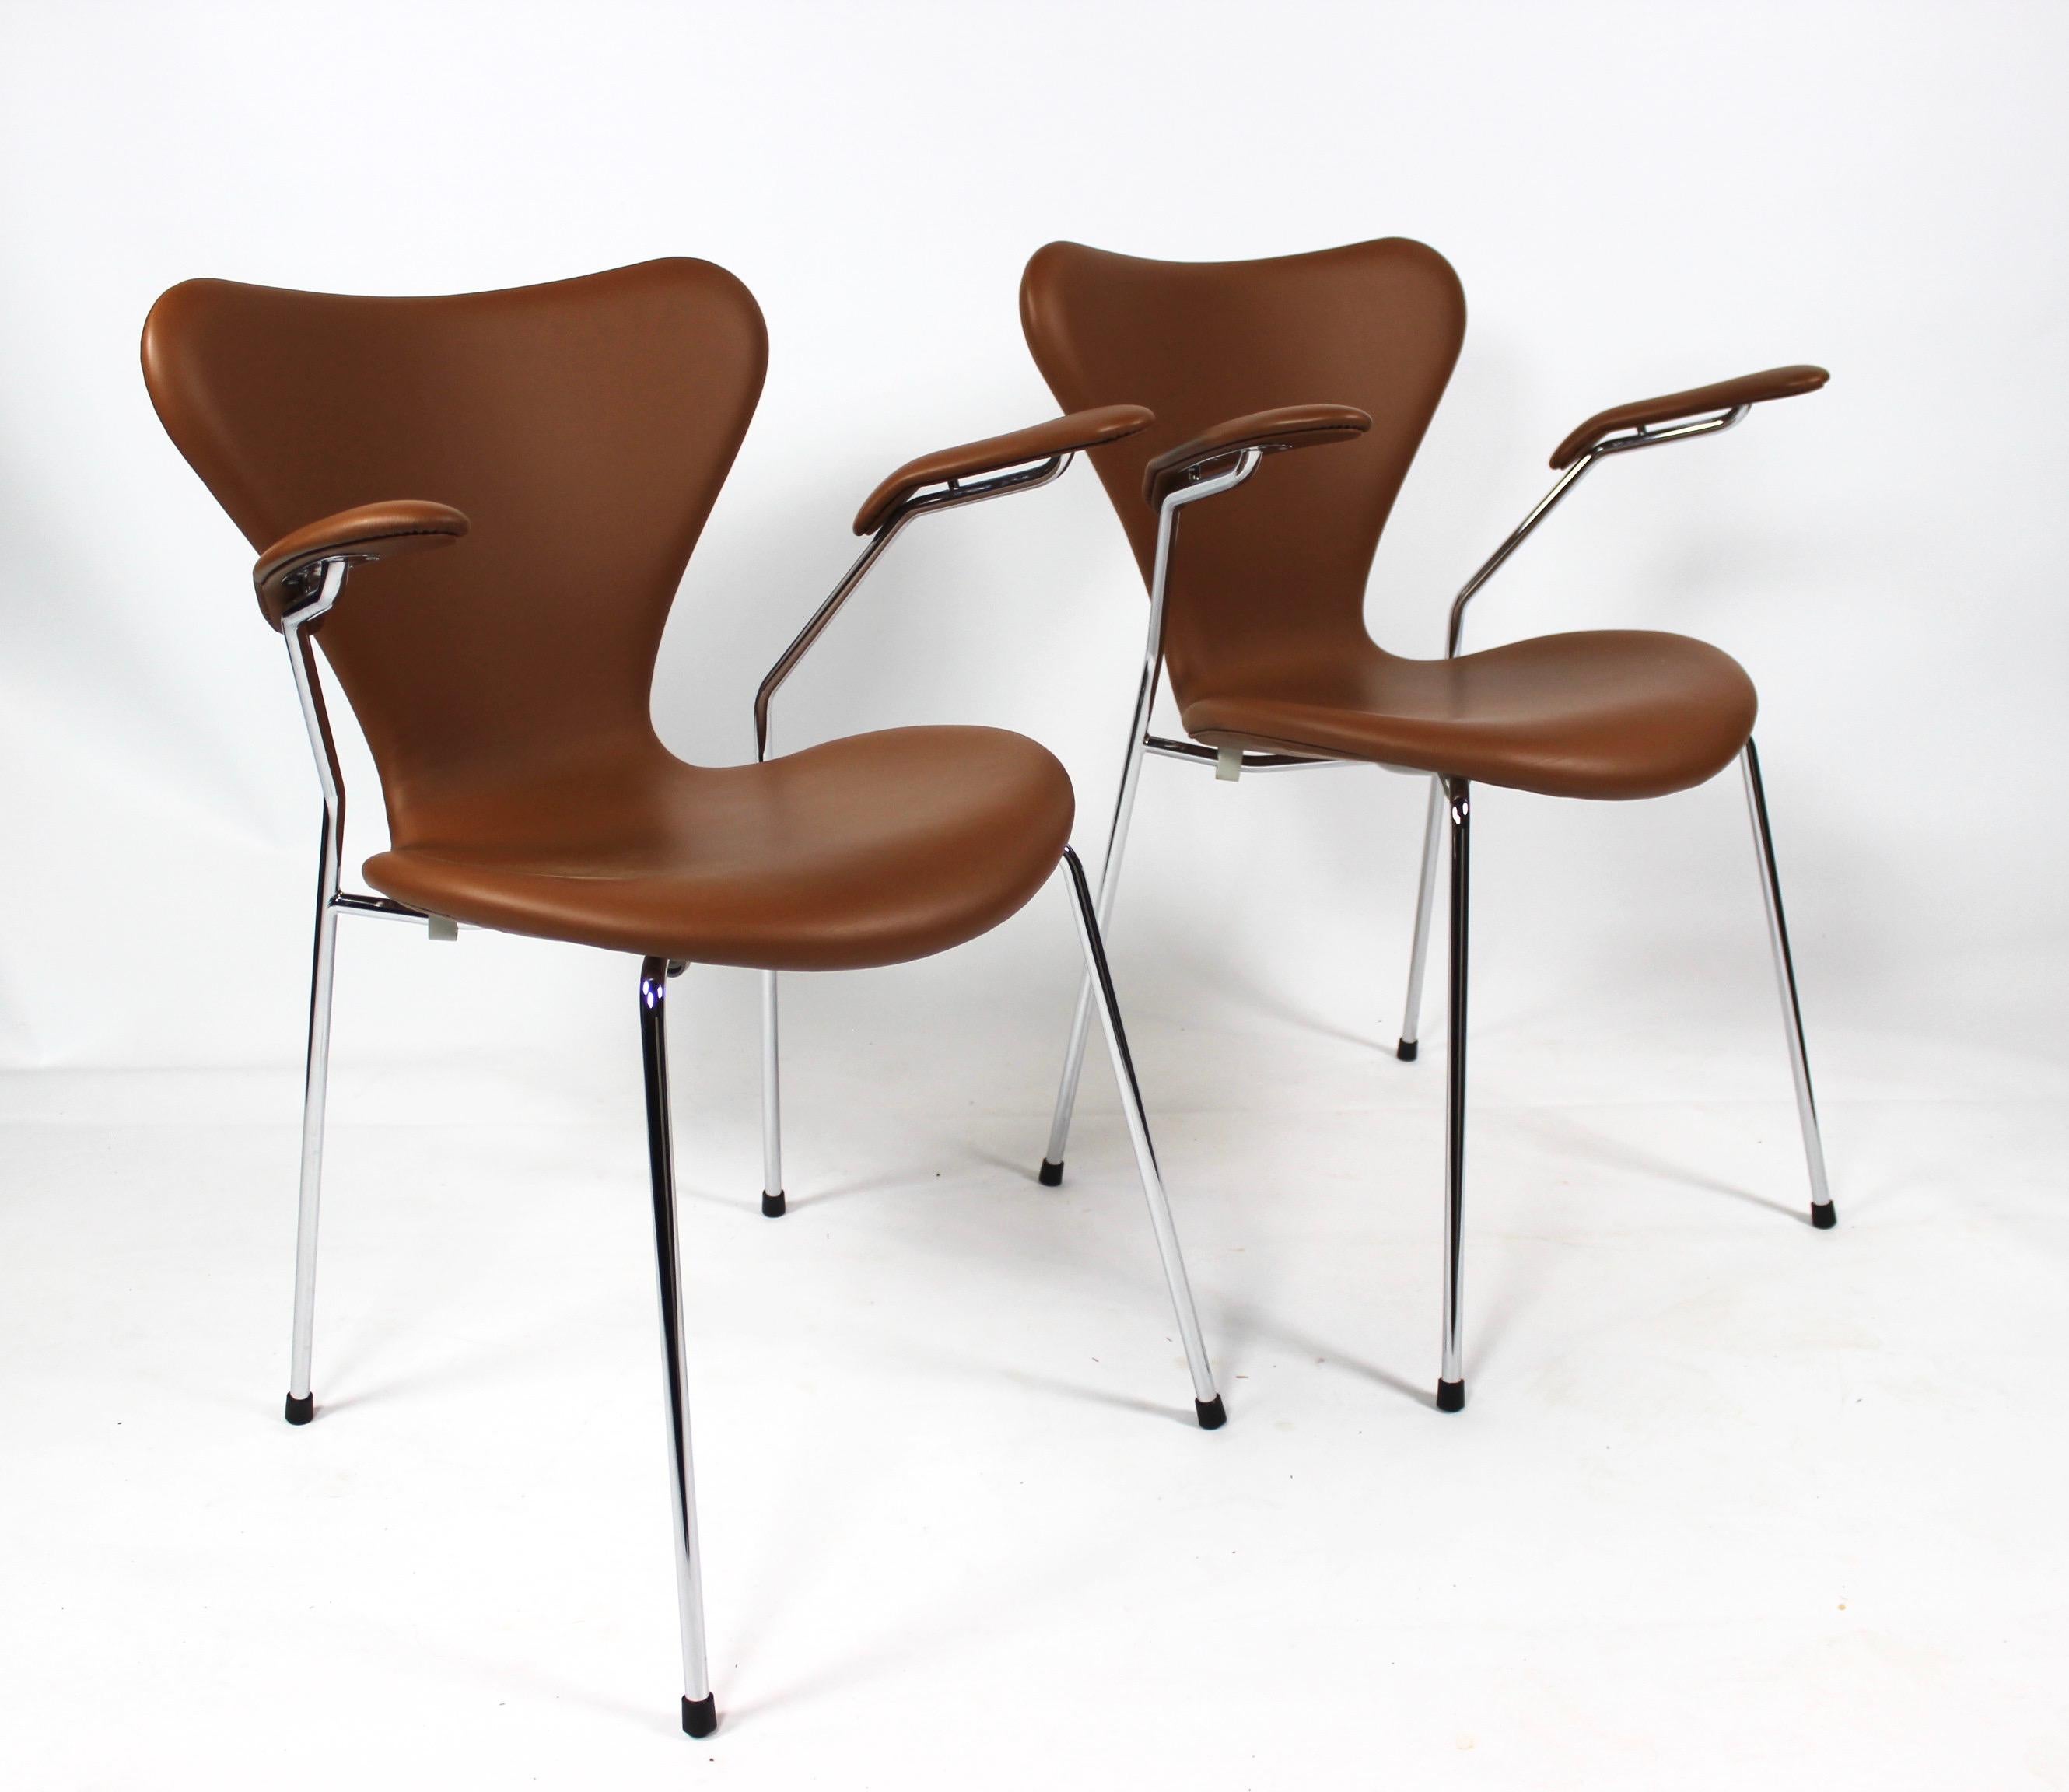 A set of seven chairs, model 3207, with armrests in cognac colored leather designed by Arne Jacobsen in 1955 and manufactured by Fritz Hansen in 2019. The chairs are in great condition.
  